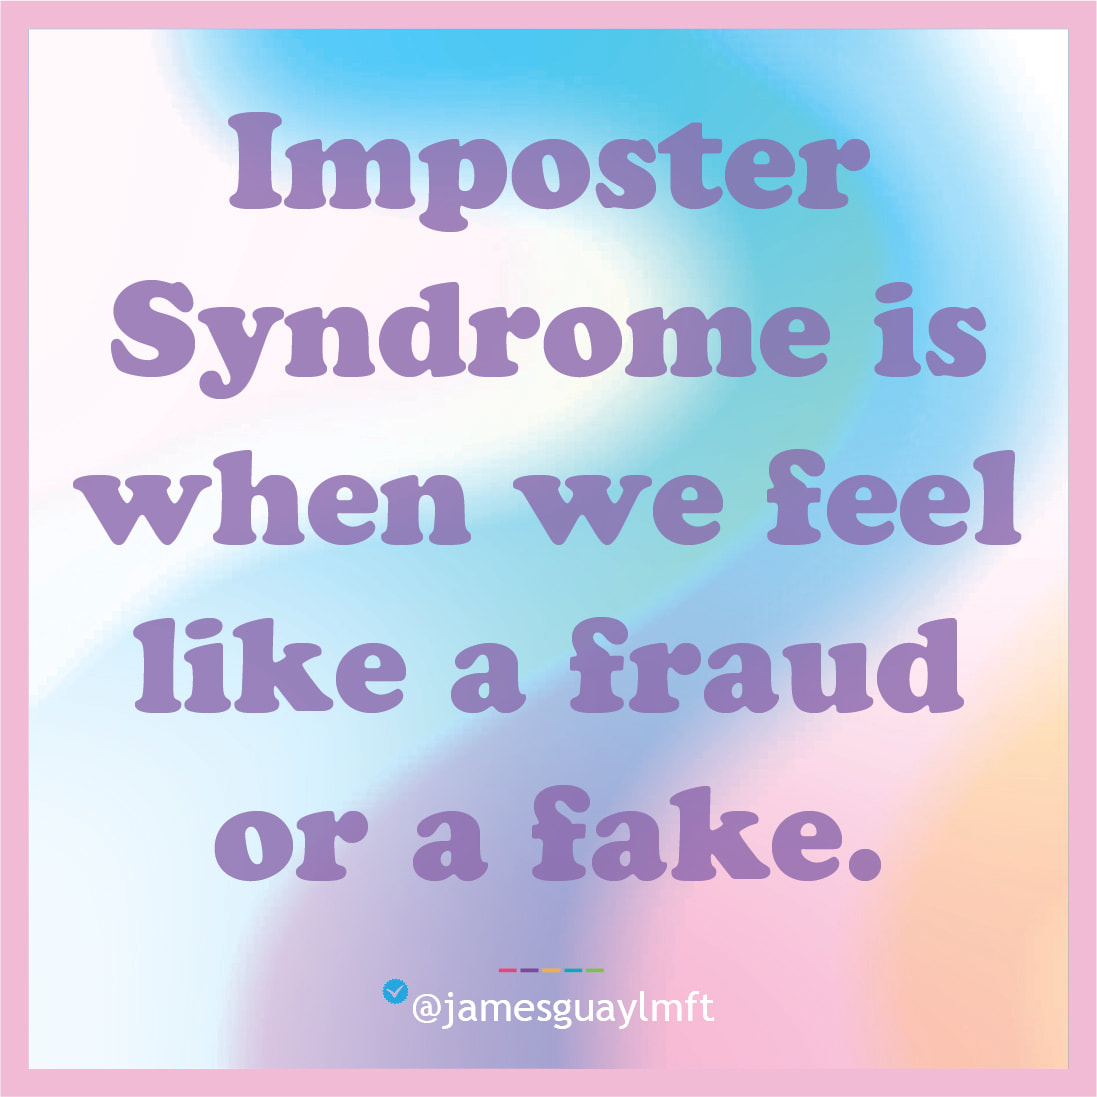 Overcoming Imposter Syndrome